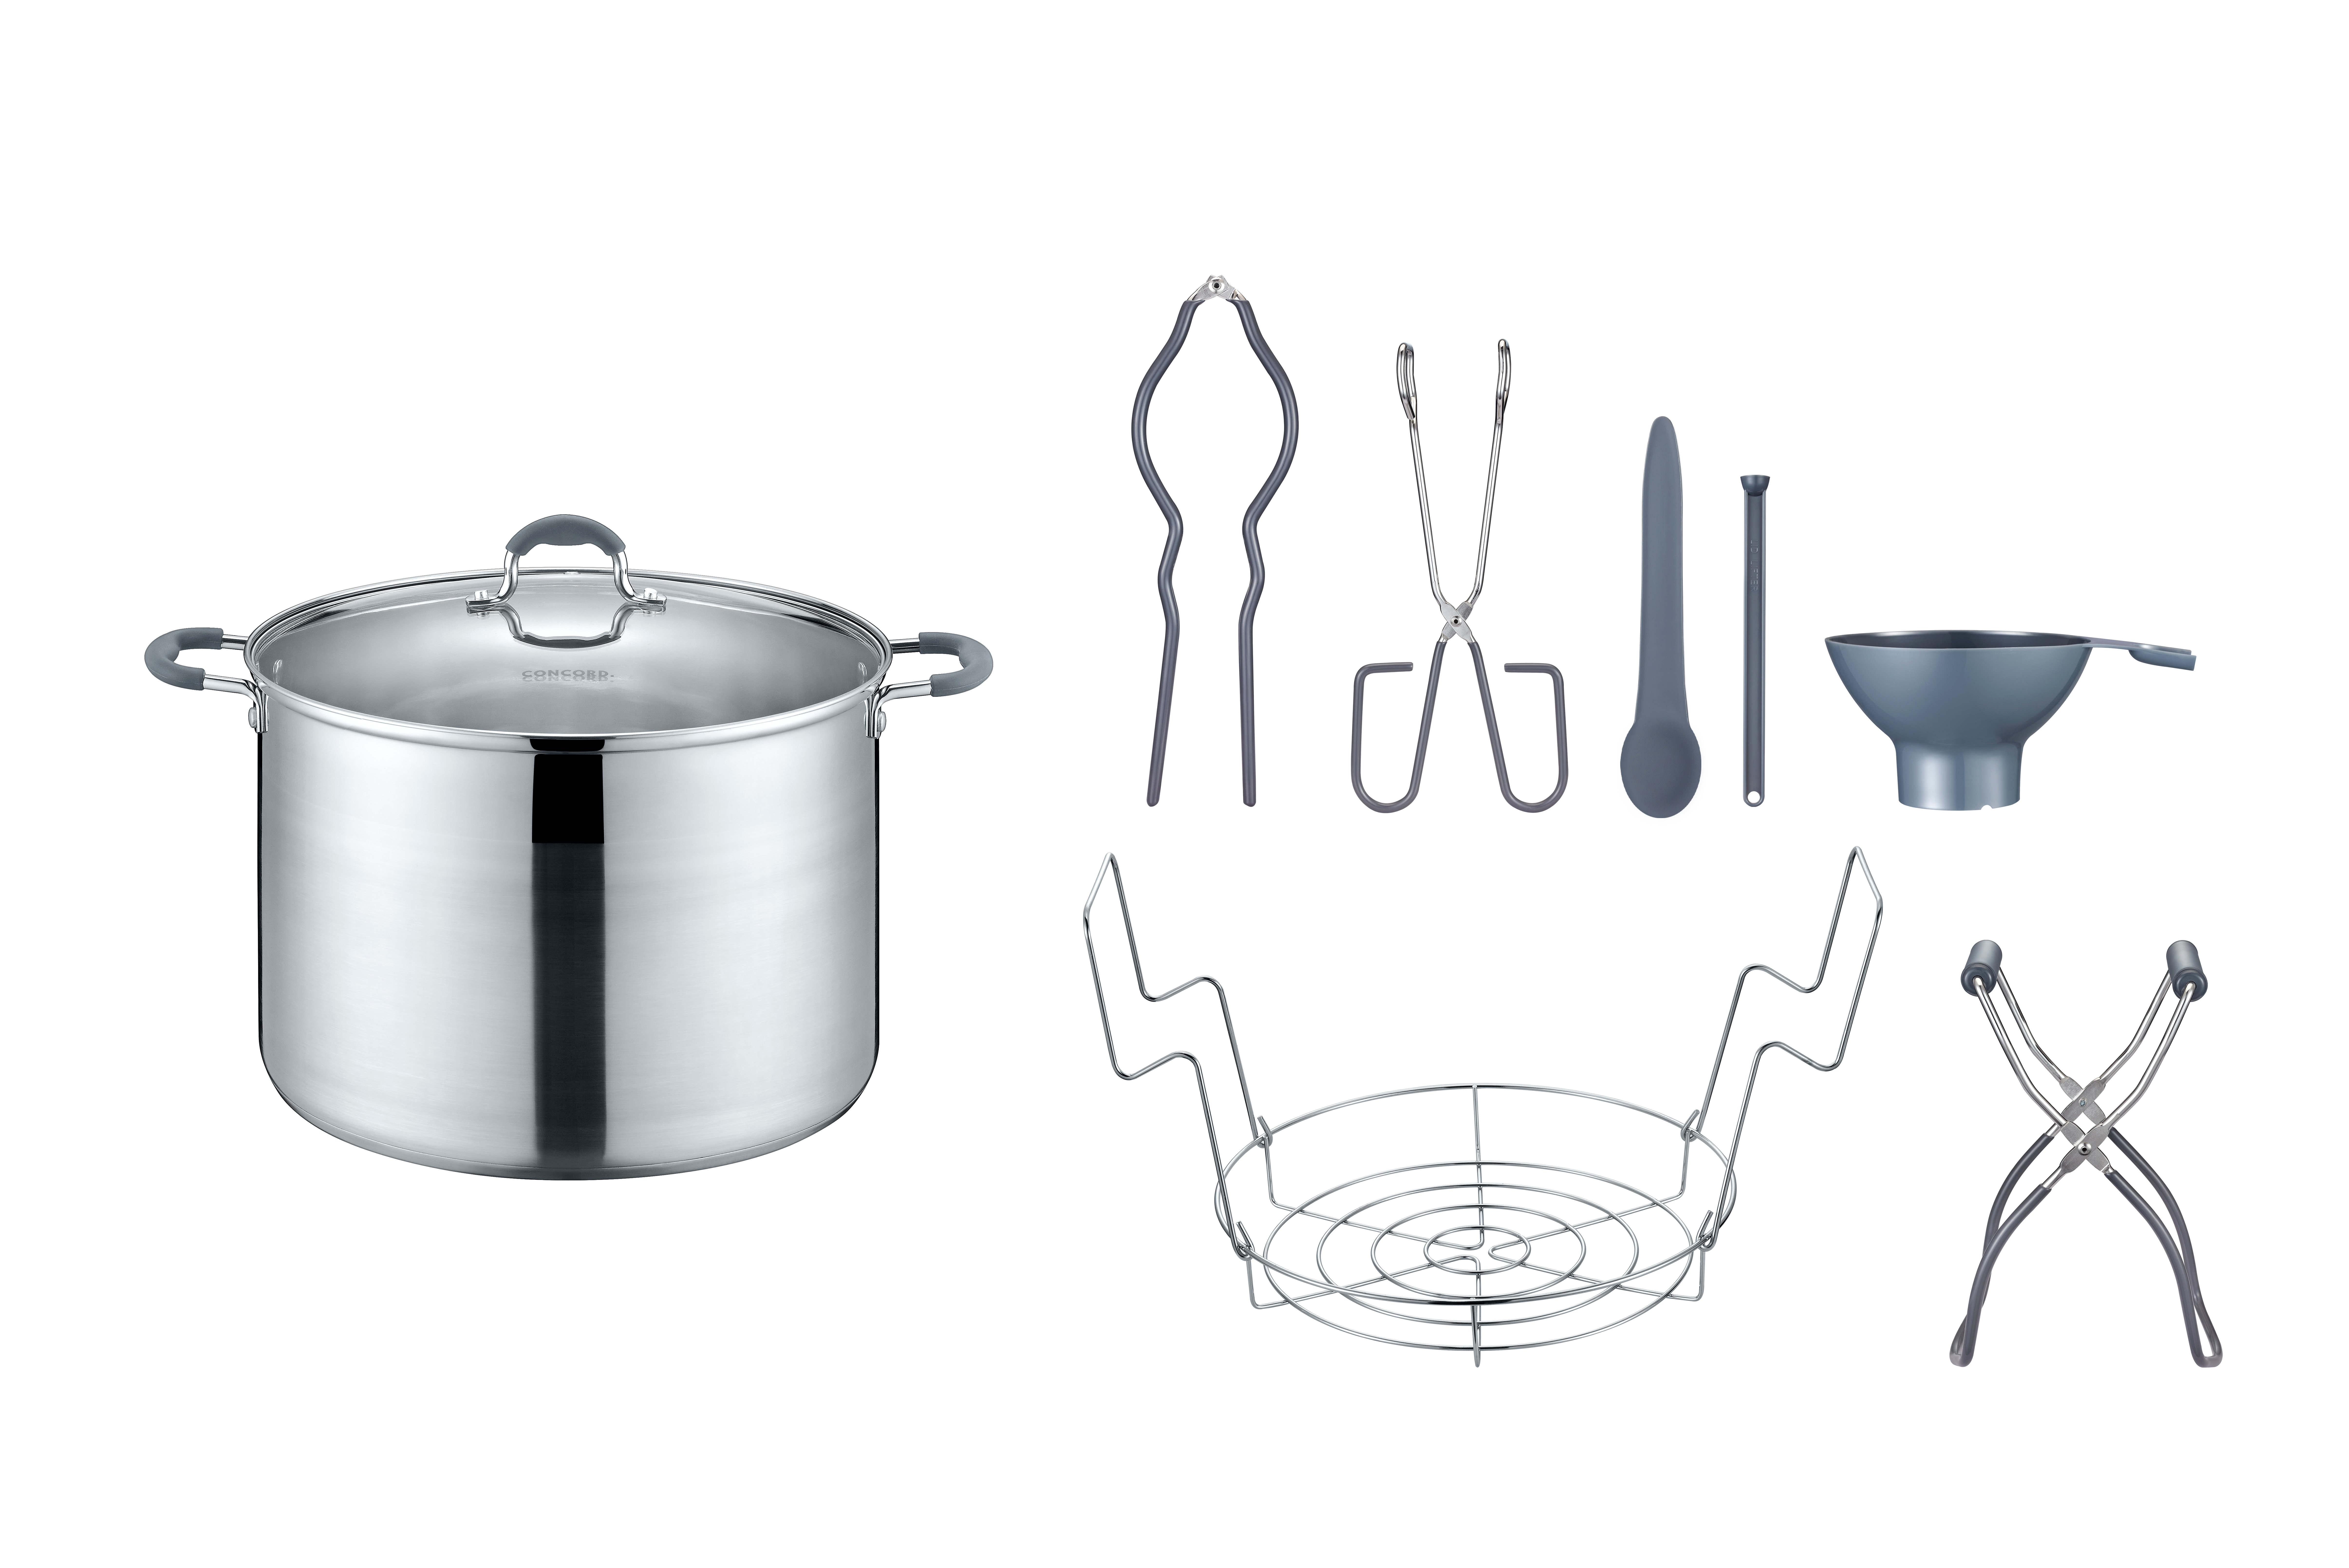  Bruntmor Stainless Steel Cookware Set - Pot with